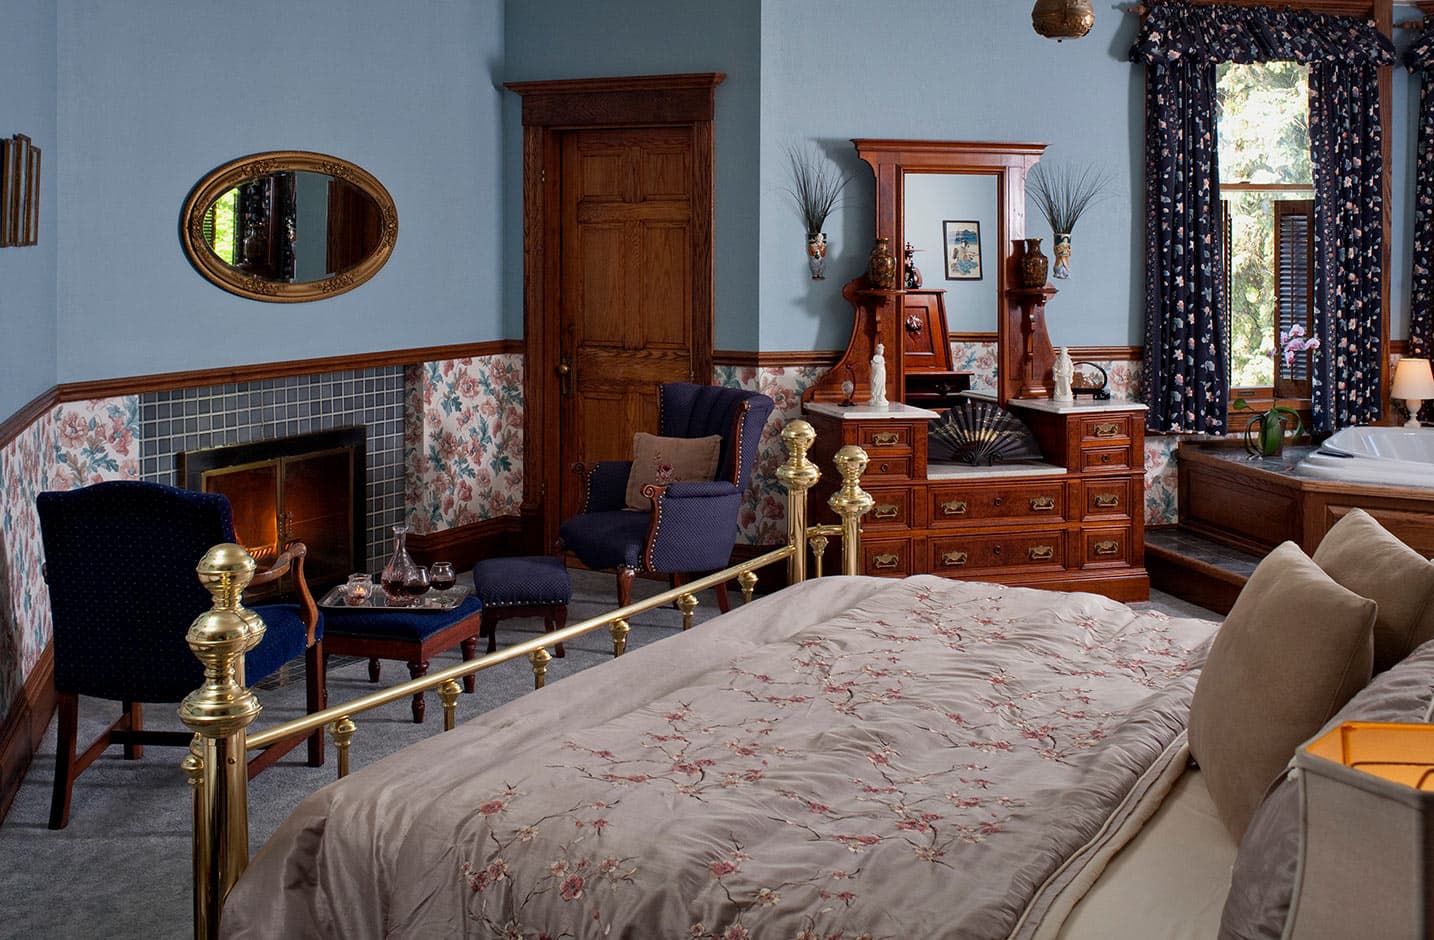 Bed and decorative fireplace in Room VII